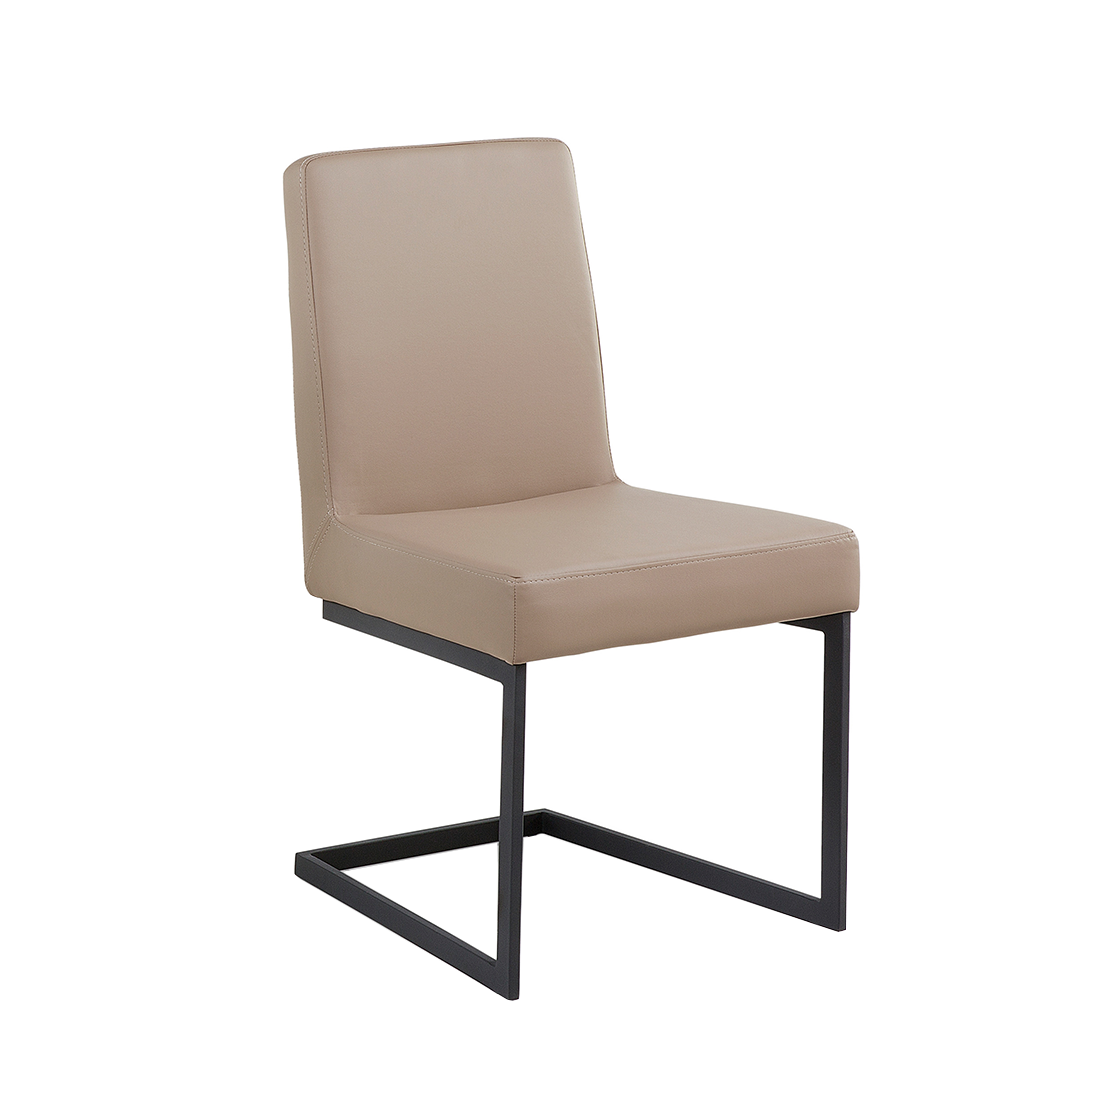 Beliani Dining Chair Beige with Silver Faux Leather Upholstered Cantilever Legs Armless Modern Design